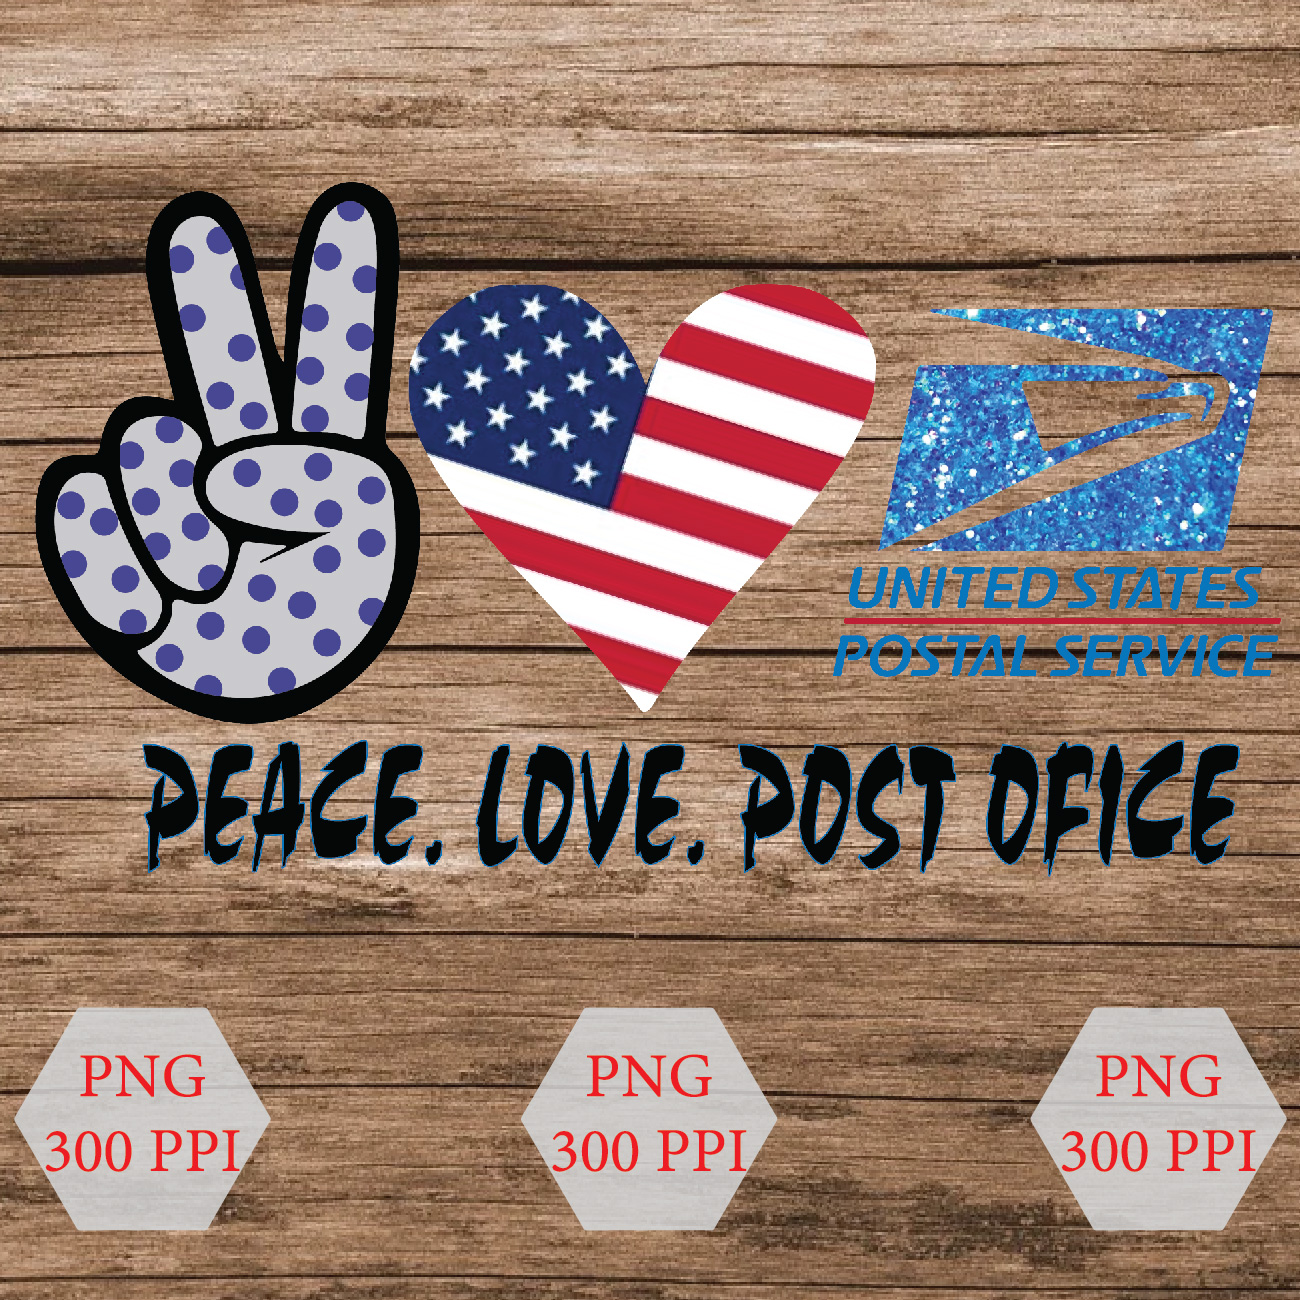 wtm wed 01 5 Peace Love POST OFFICE svg/ Peace love POst office png/ Peace, Love, post office/ post office png/ post office design